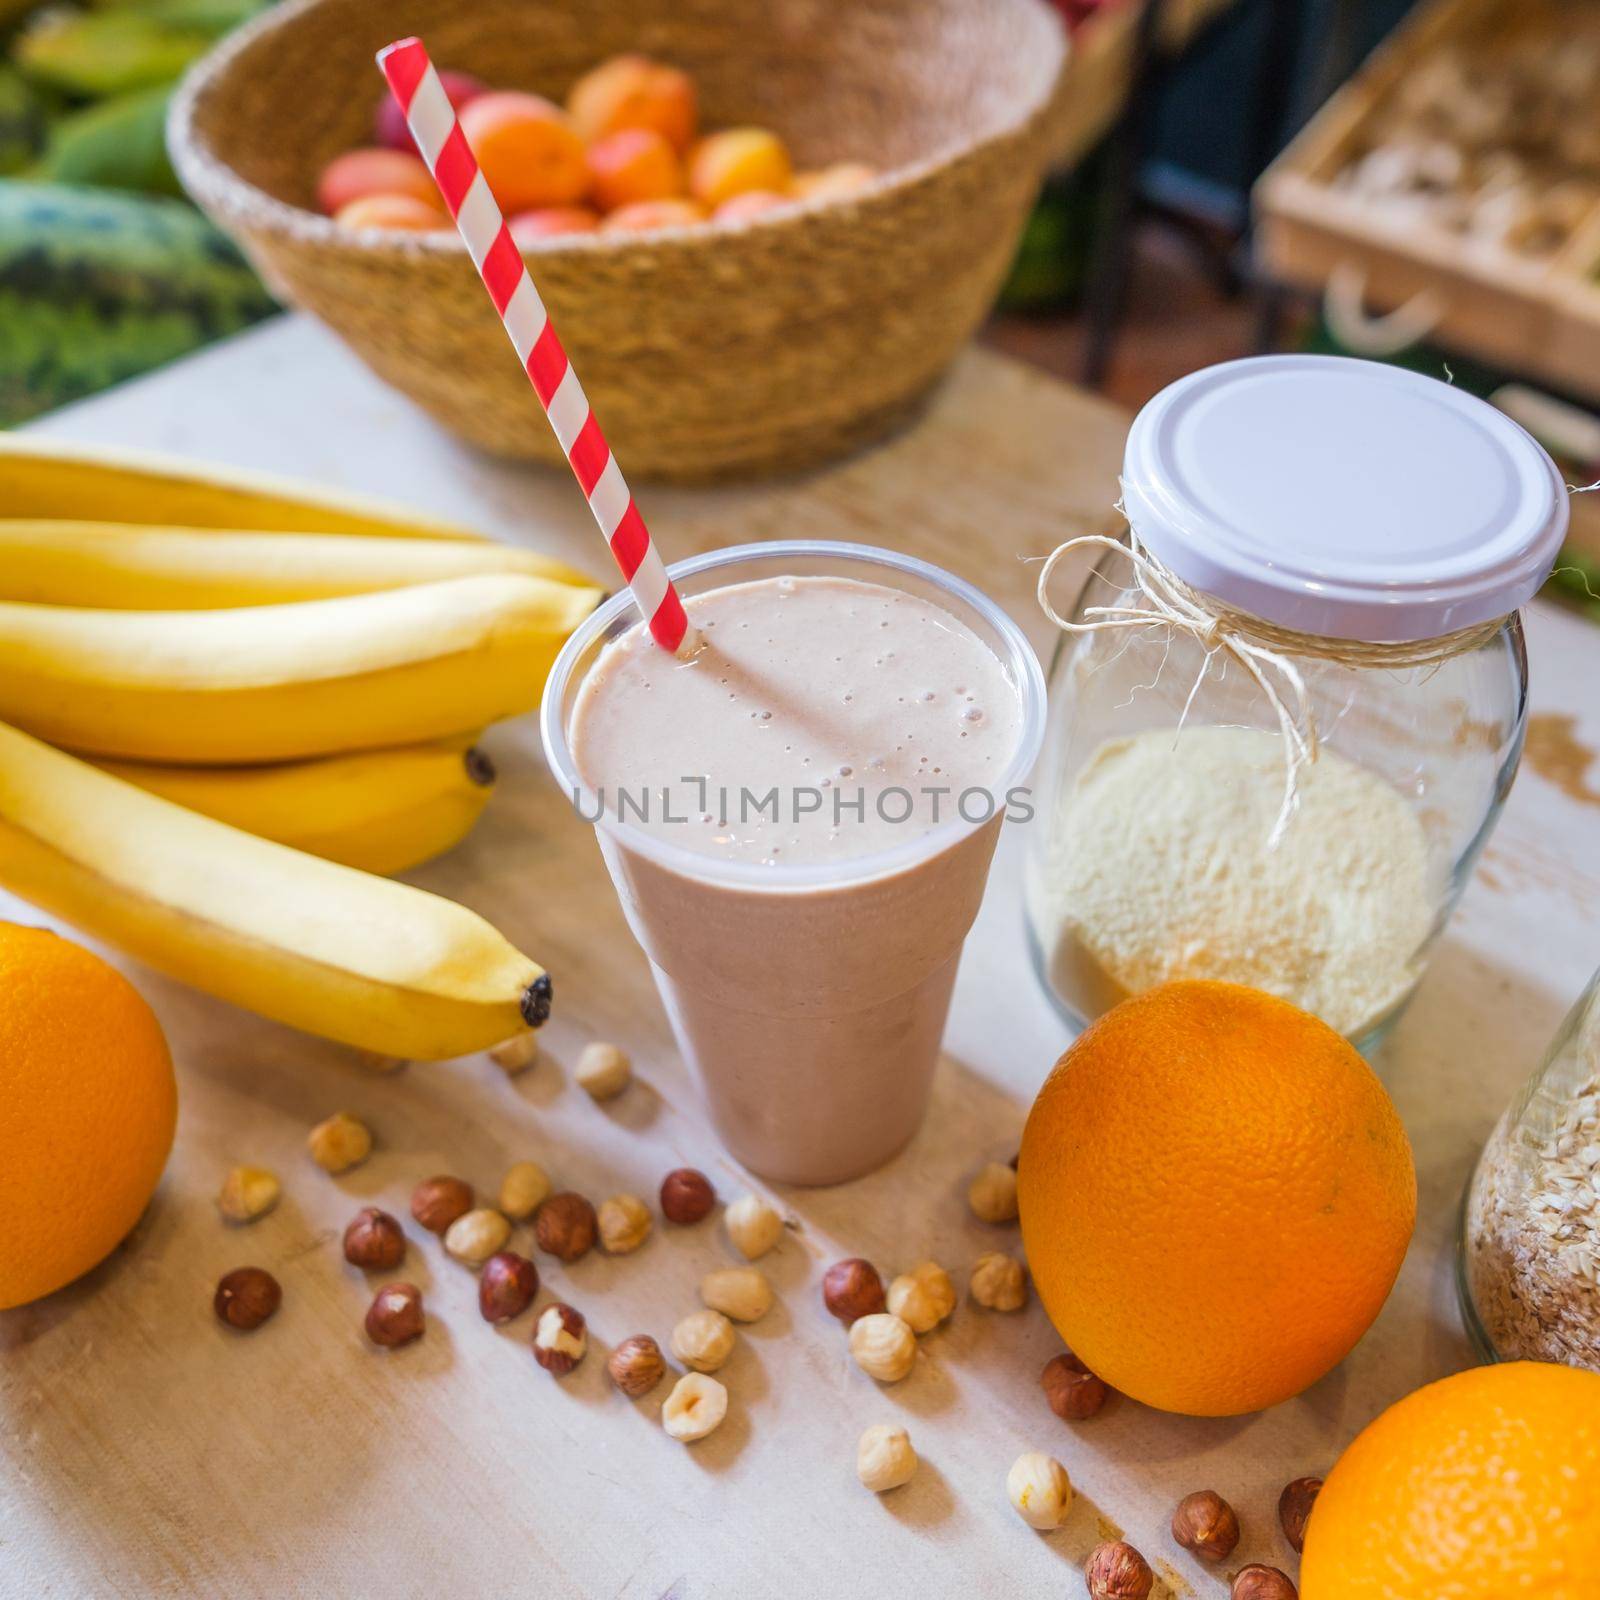 Healthy fruit shake on table with fruits and vegetables ingredients around.